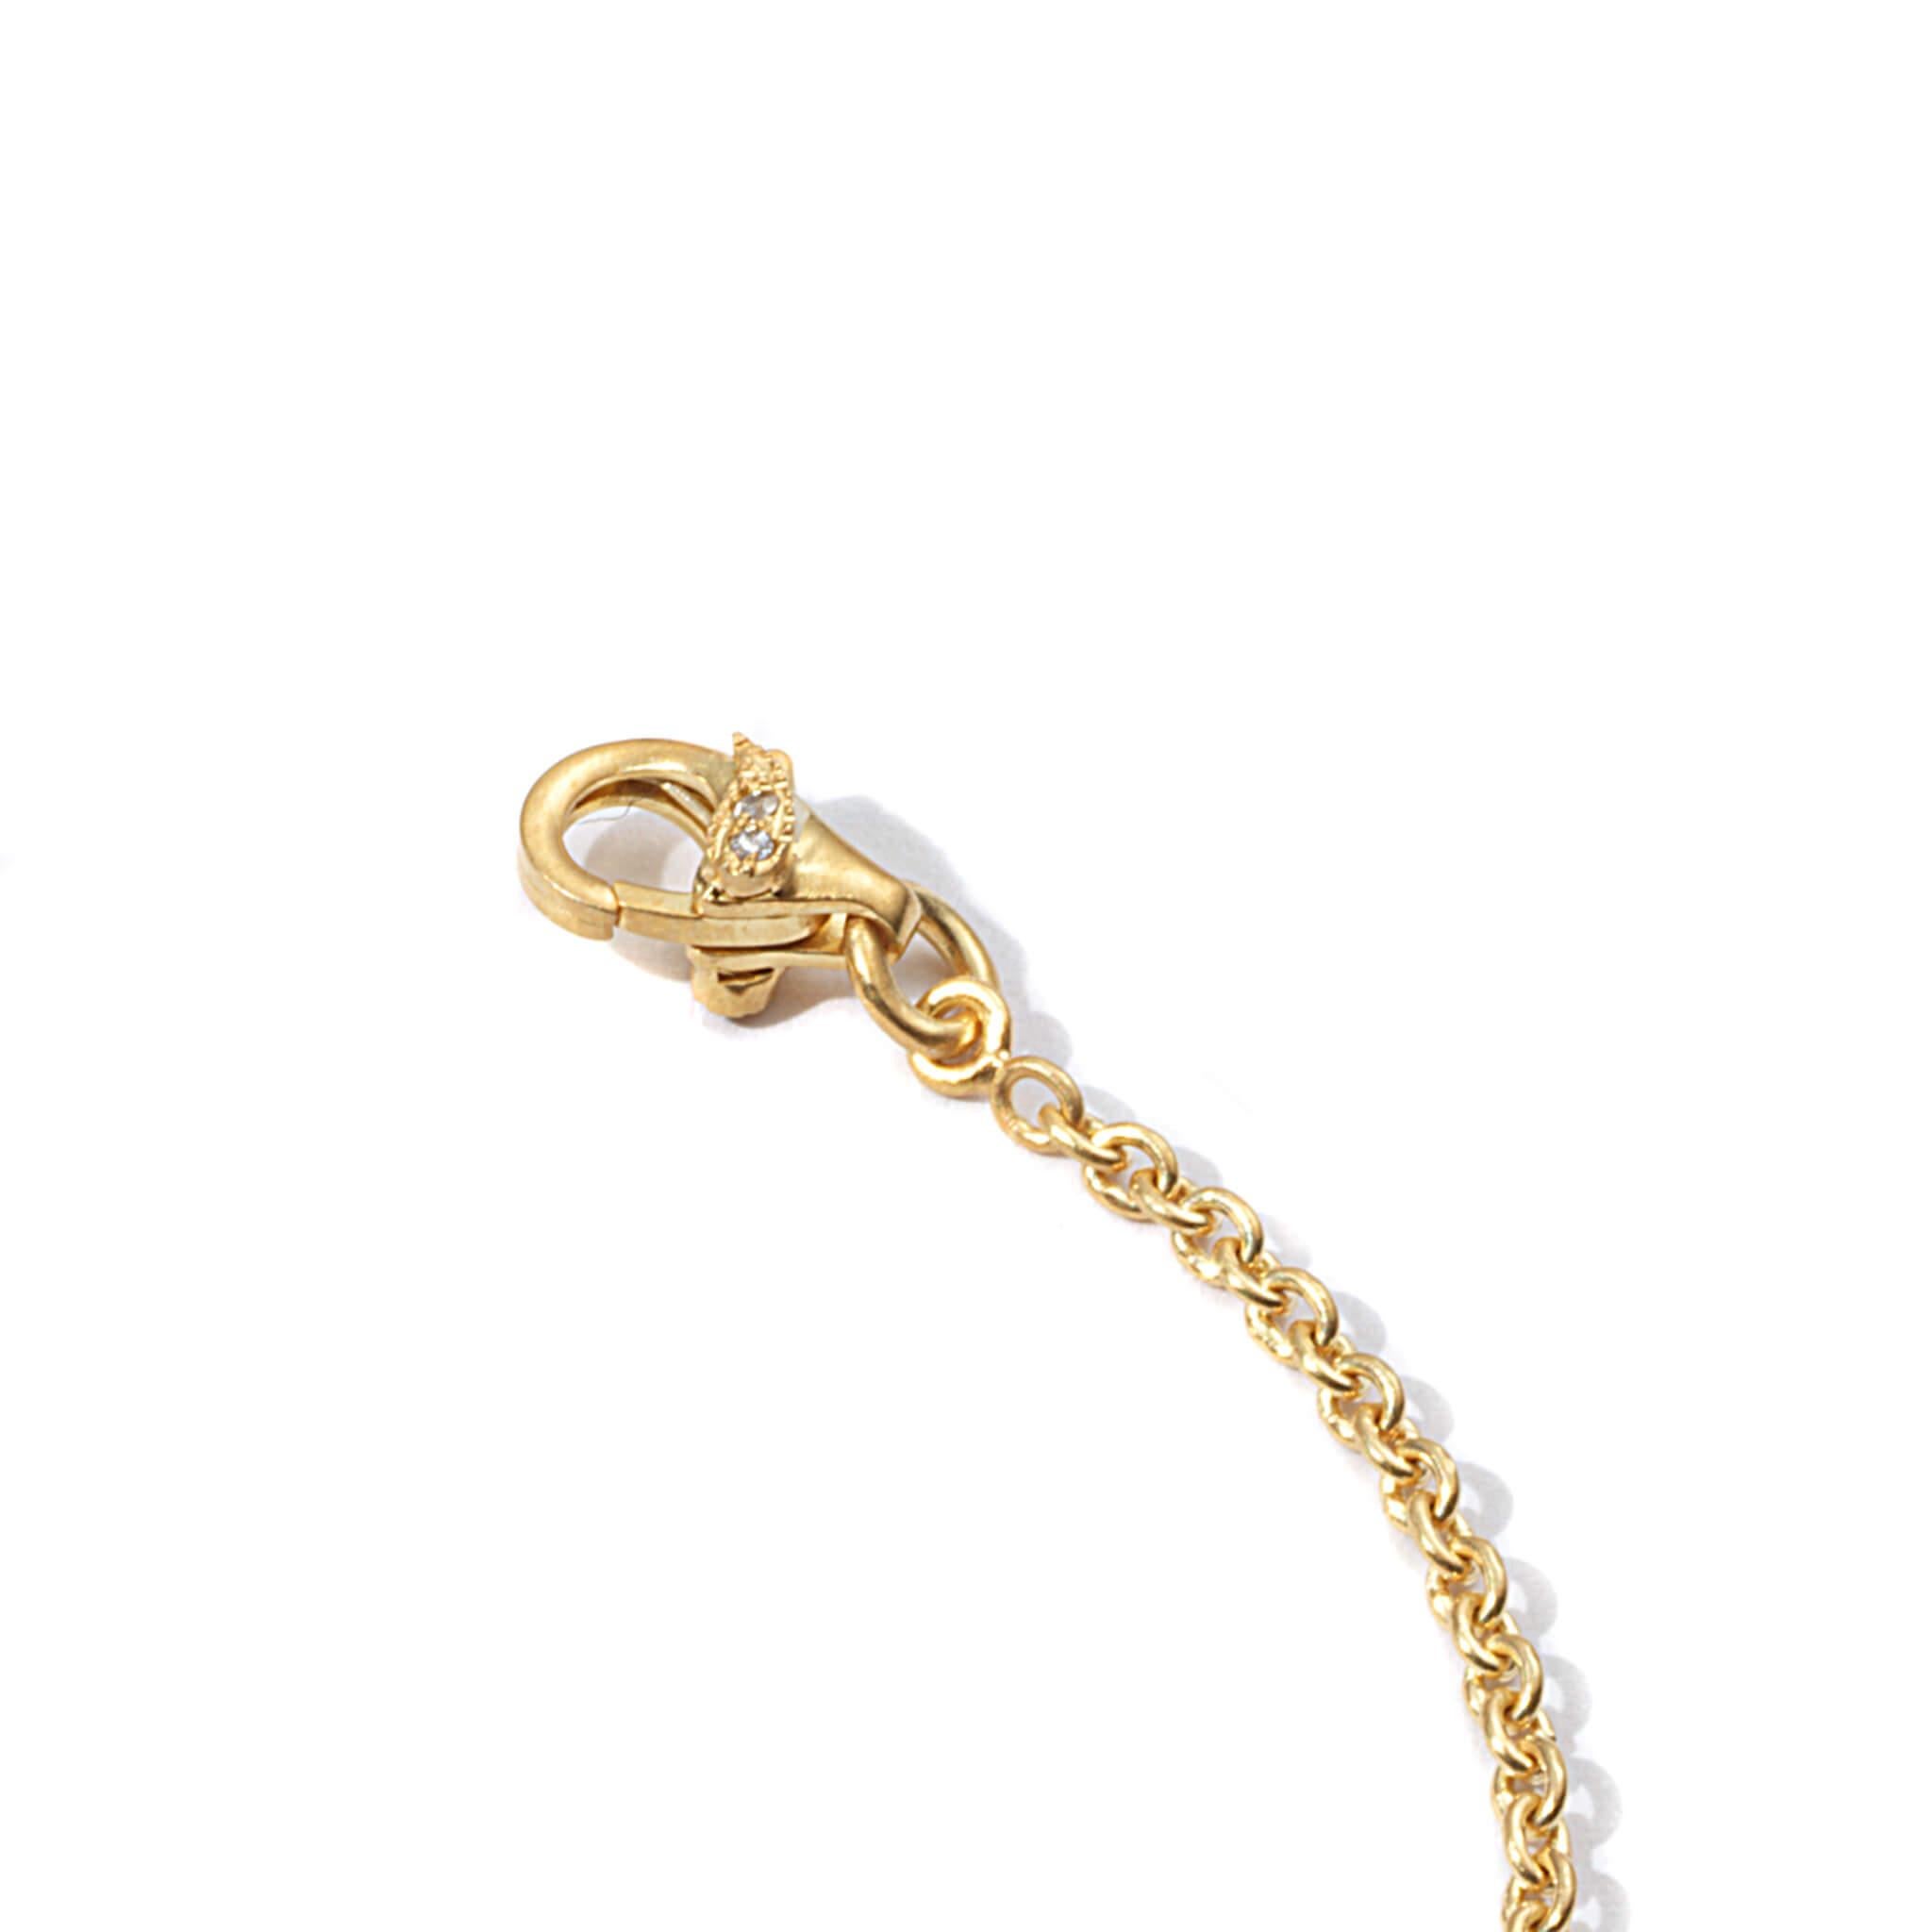 COOMI Opera Eternity collection chain bracelet set in 20K yellow gold with 0.26cts diamond.
